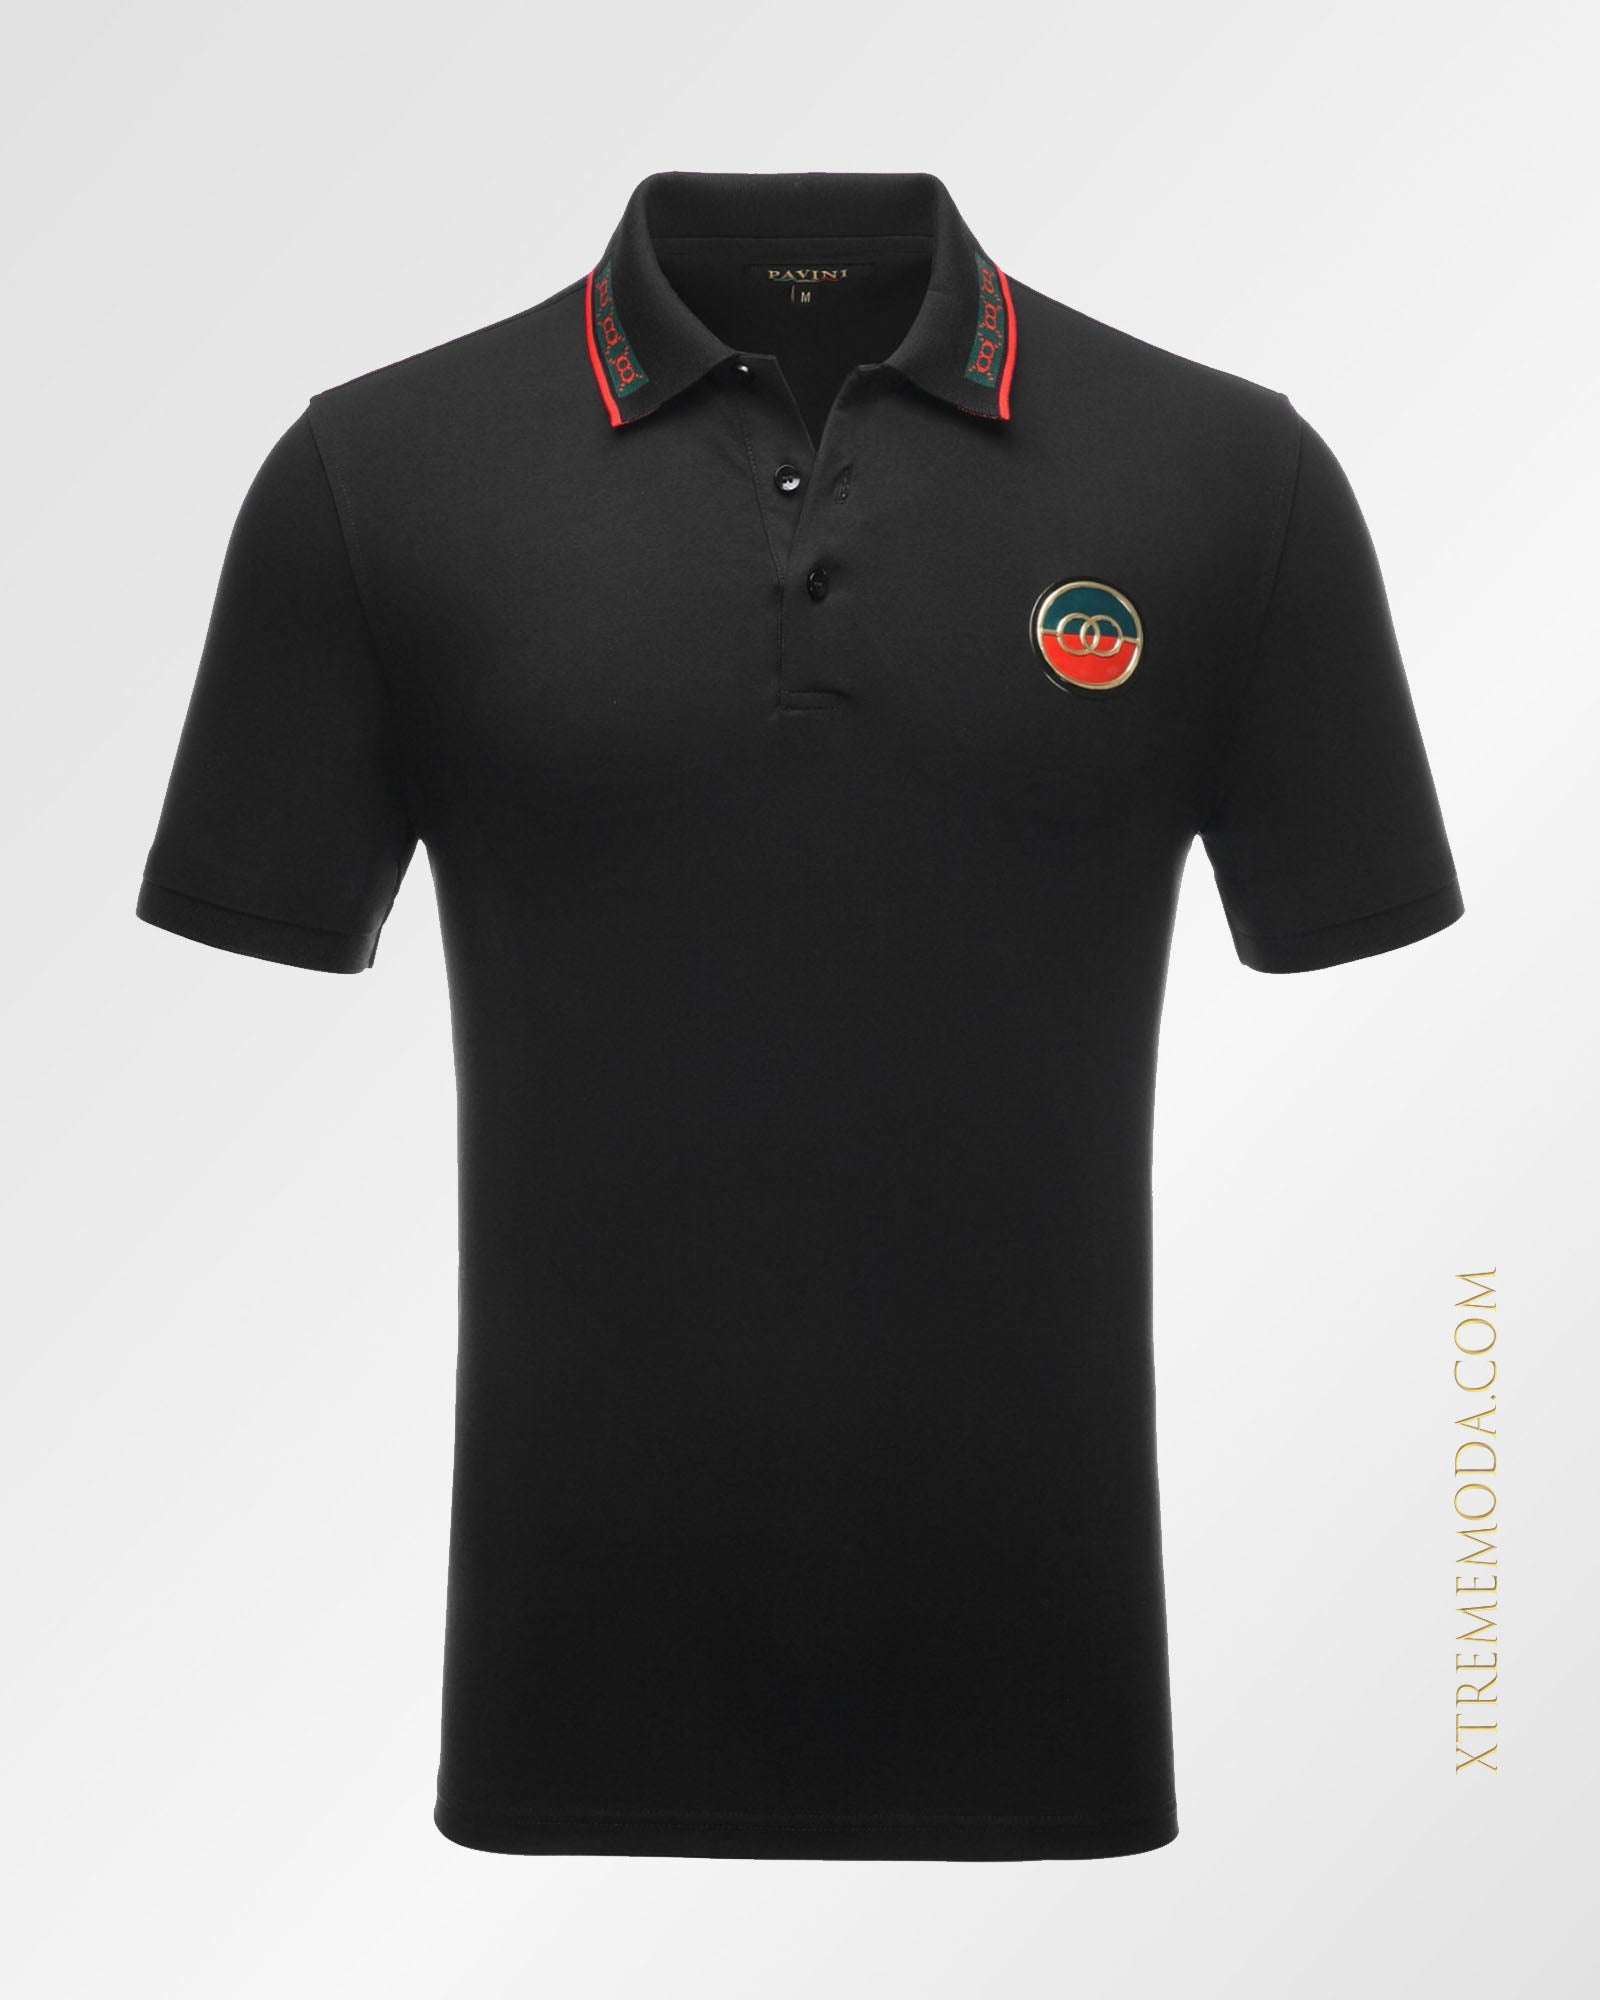 Double ring patch polo shirt Black